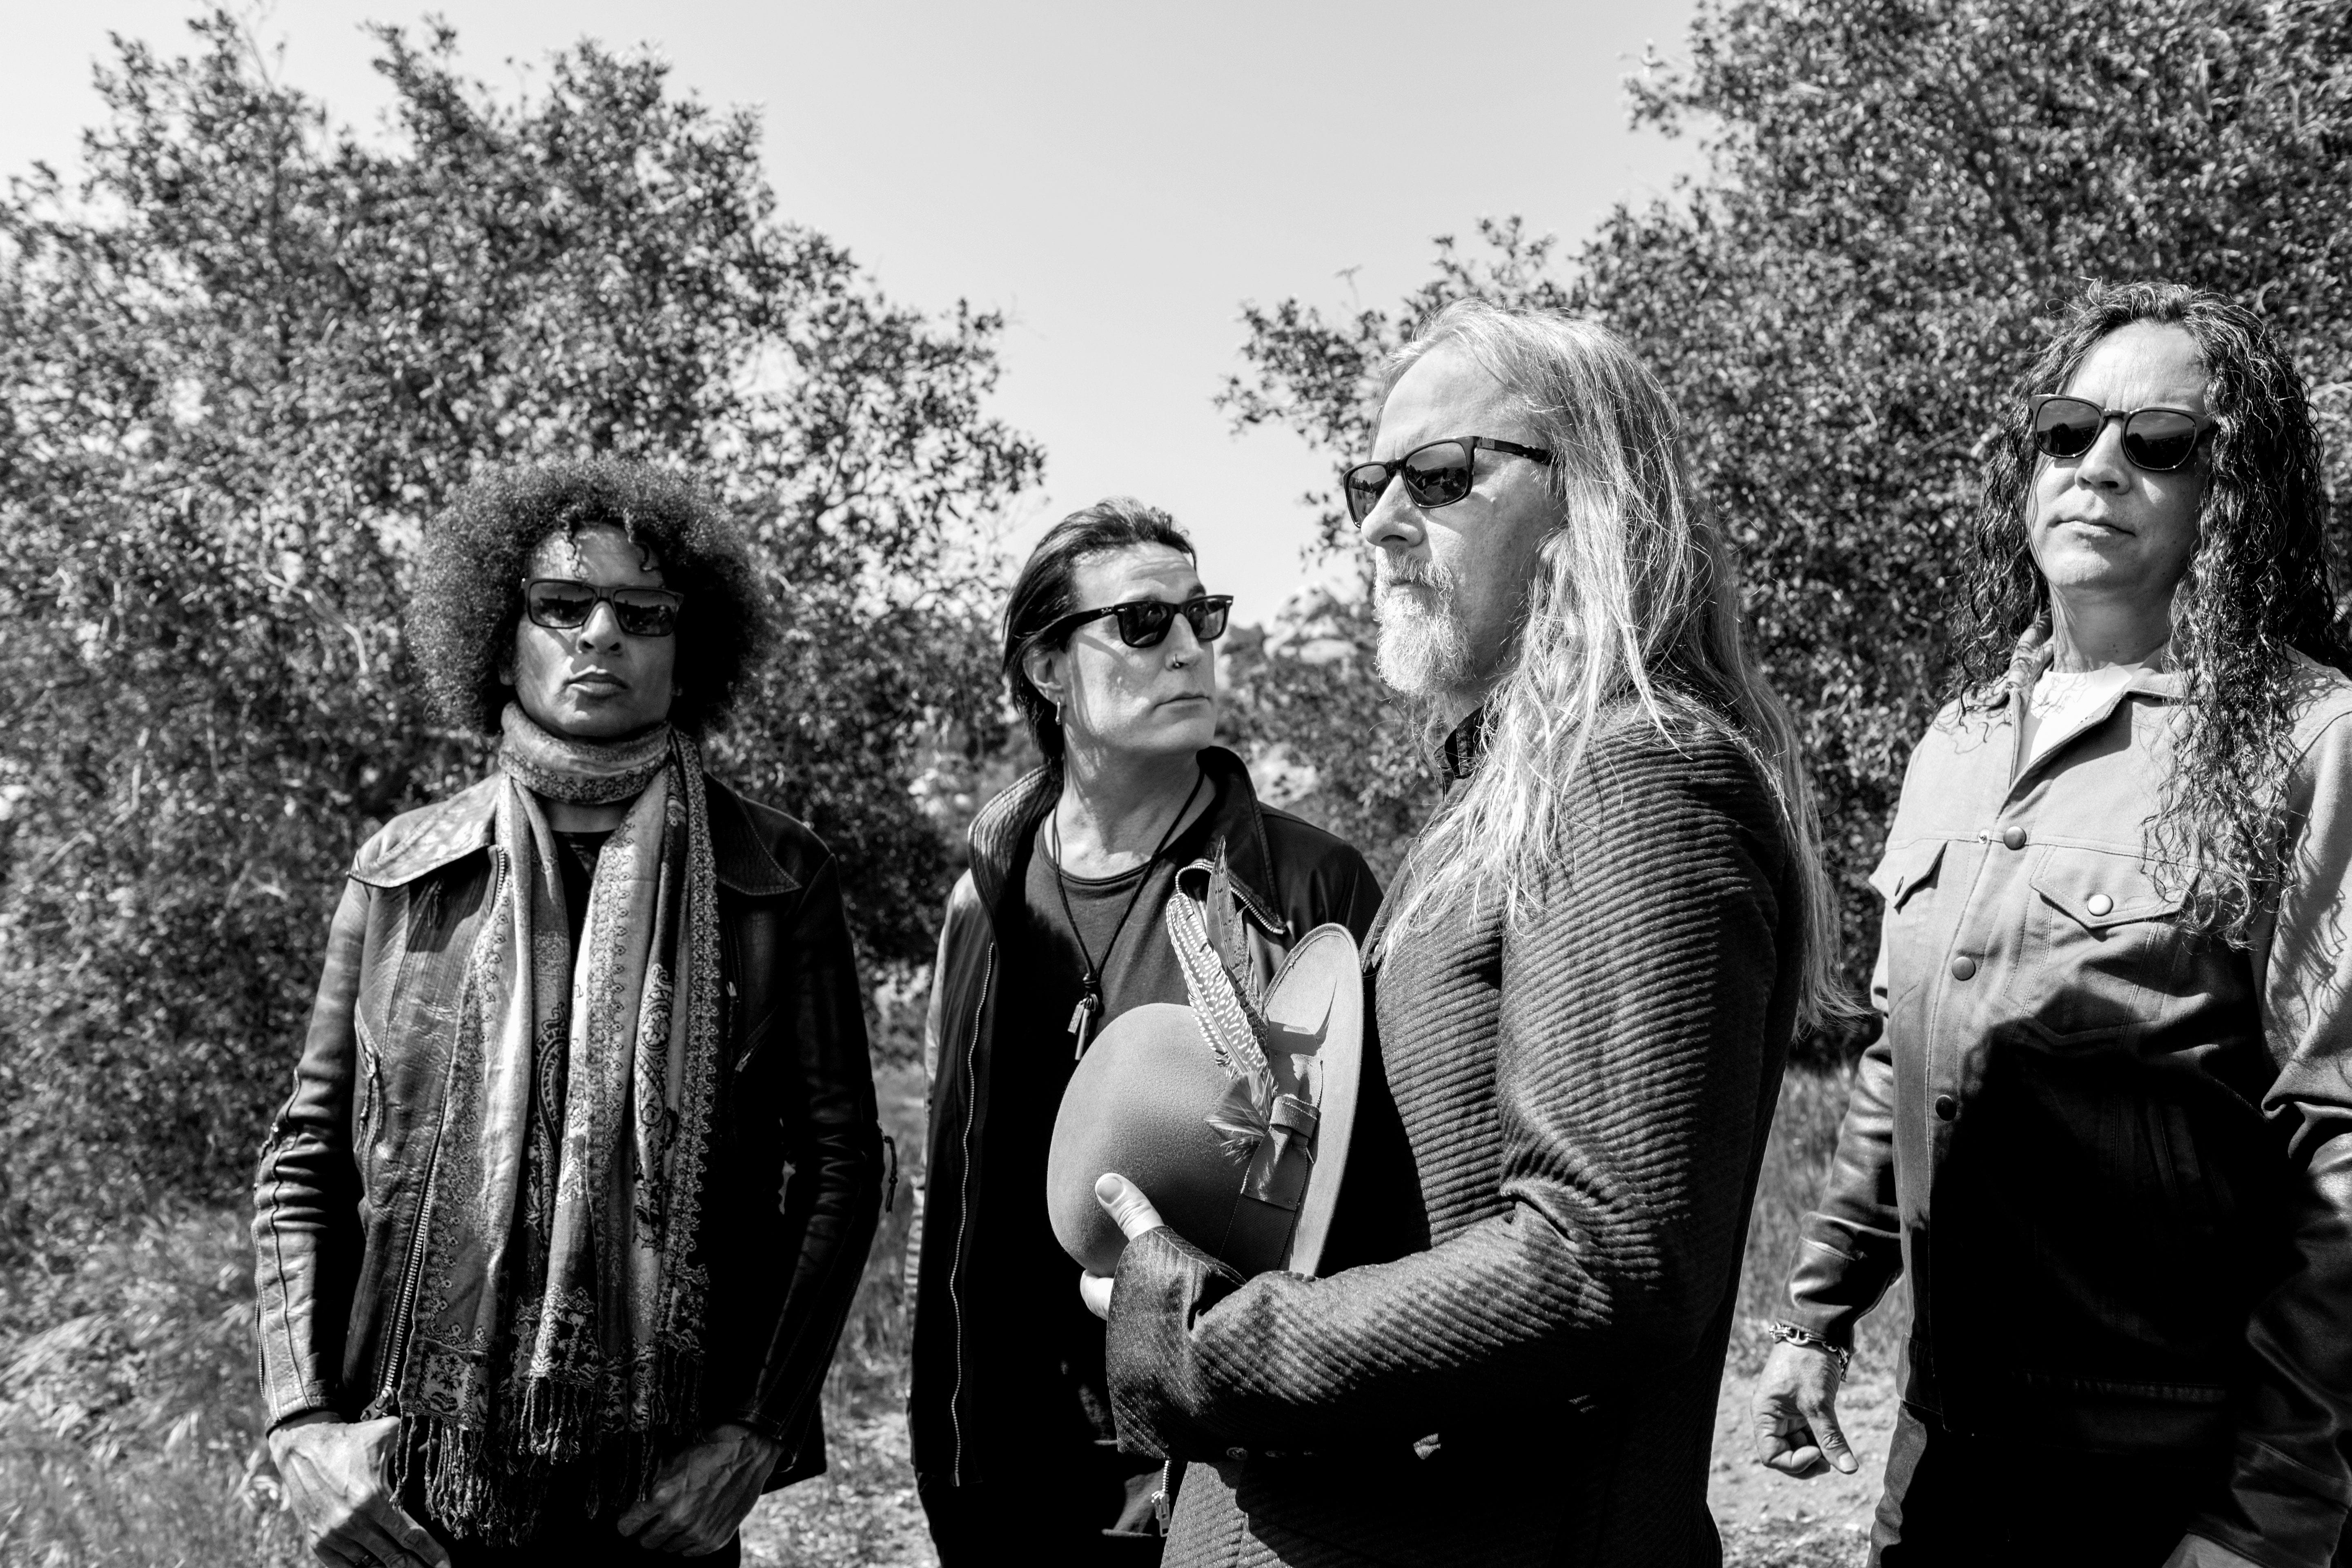 Destroy Or Be Destroyed: Alice in Chains Confronts Ghosts, Past on ‘Rainier Fog’